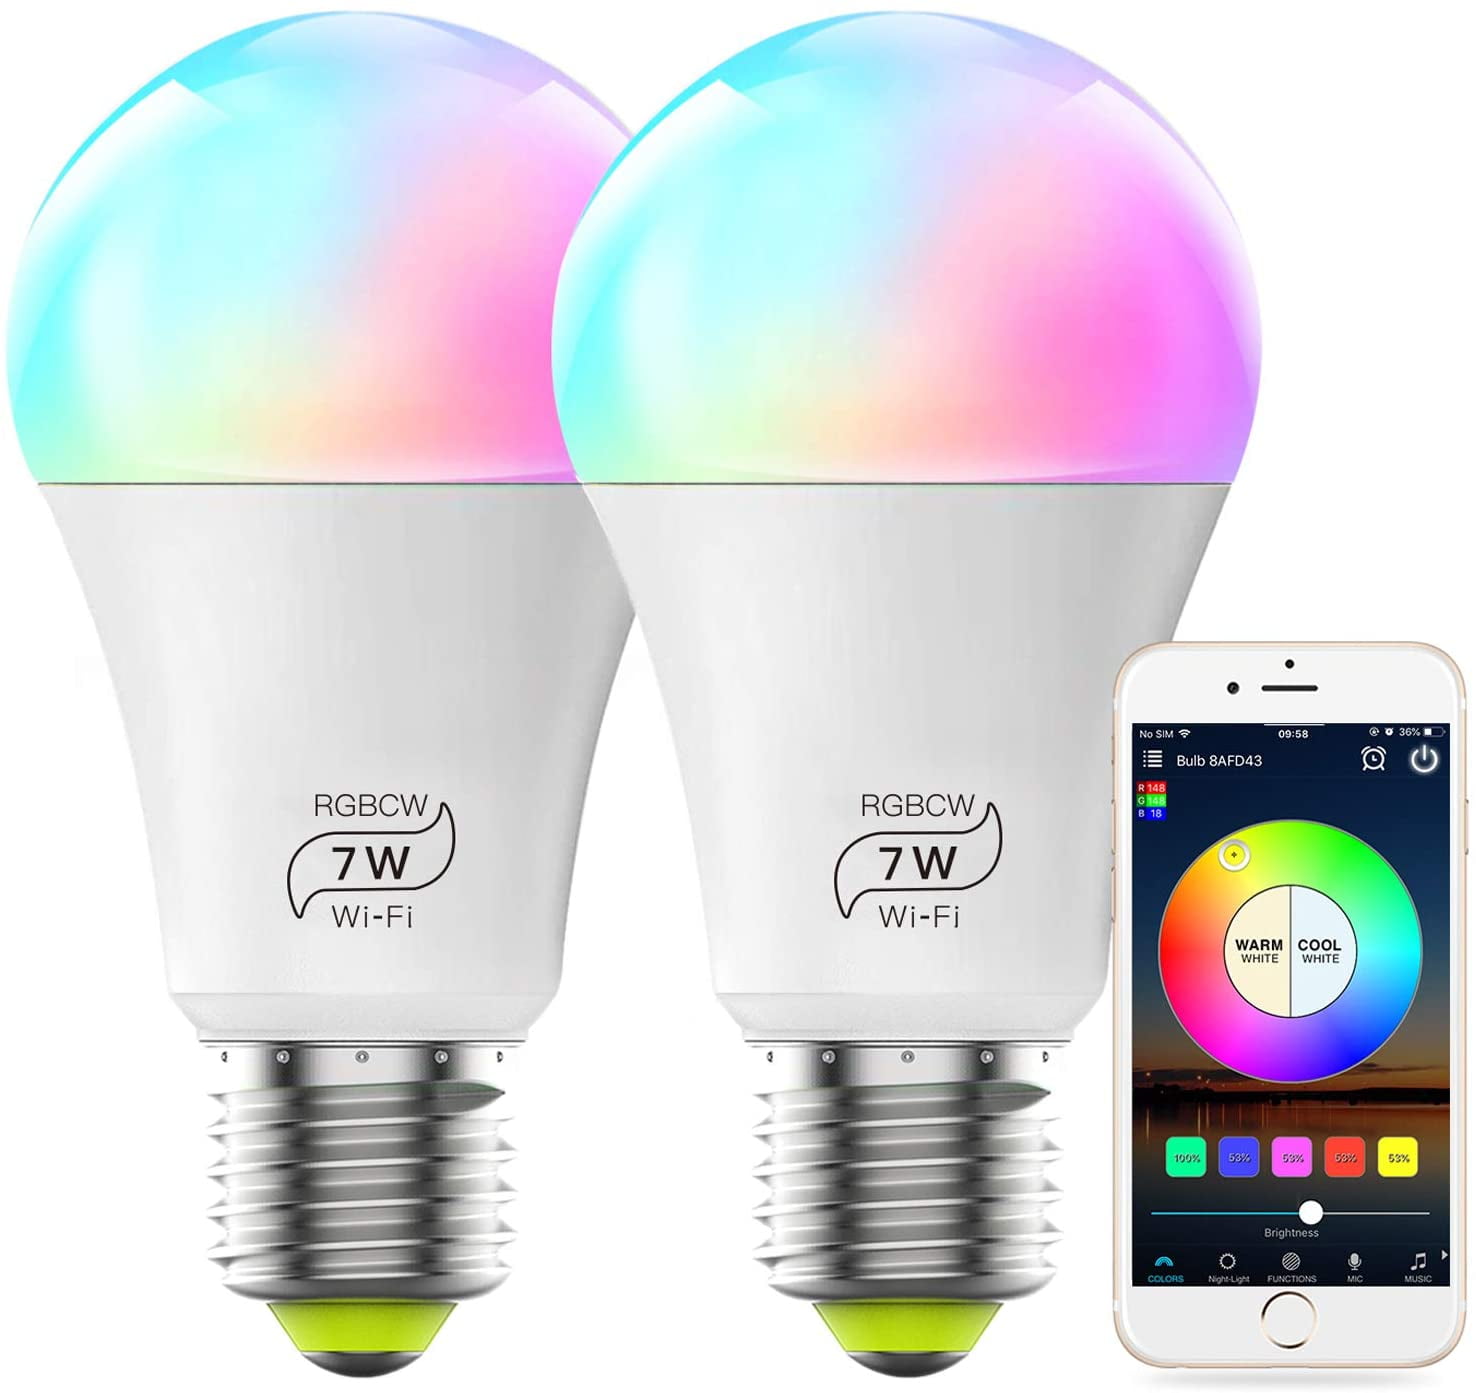 MagicLight Smart Light Bulb (No Hub Required), E26 A19 Equivalent) Multicolor Dimmable WiFi LED Bulb (1 -